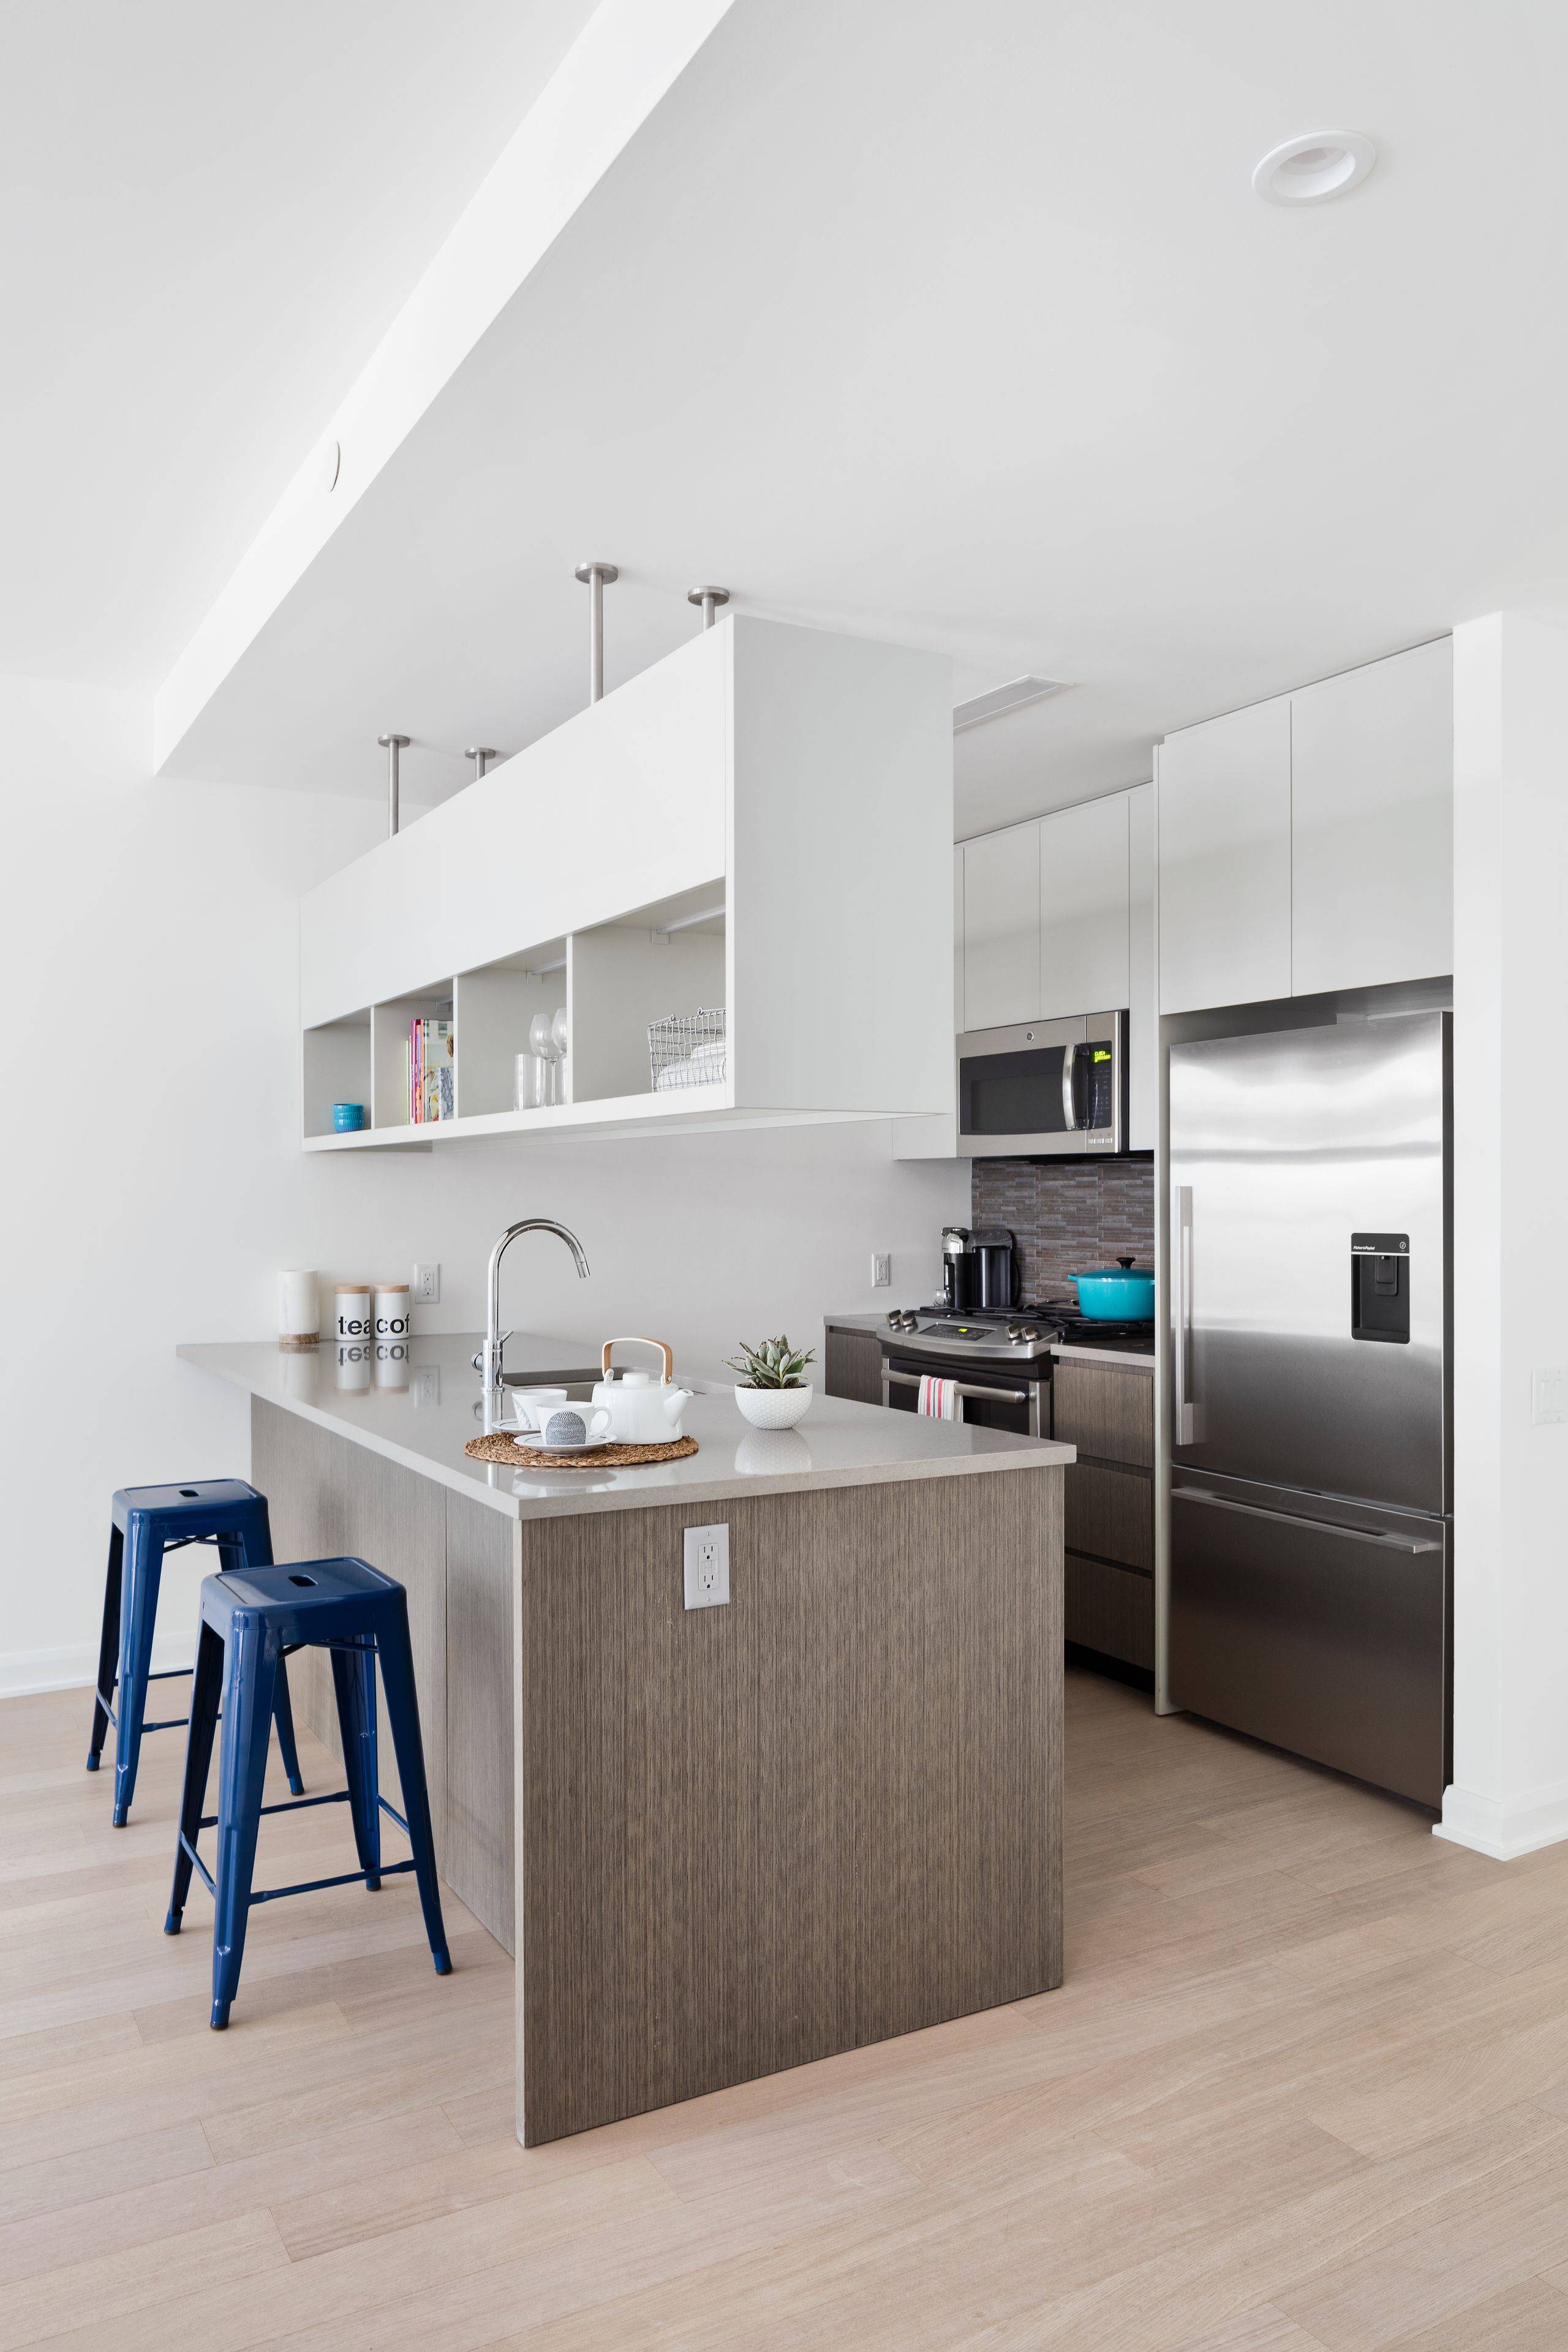 Perfect one bedroom with dramatic floor to ceiling windows and a gourmet kitchen with stainless steel appliances, quartz countertops and eating bar.